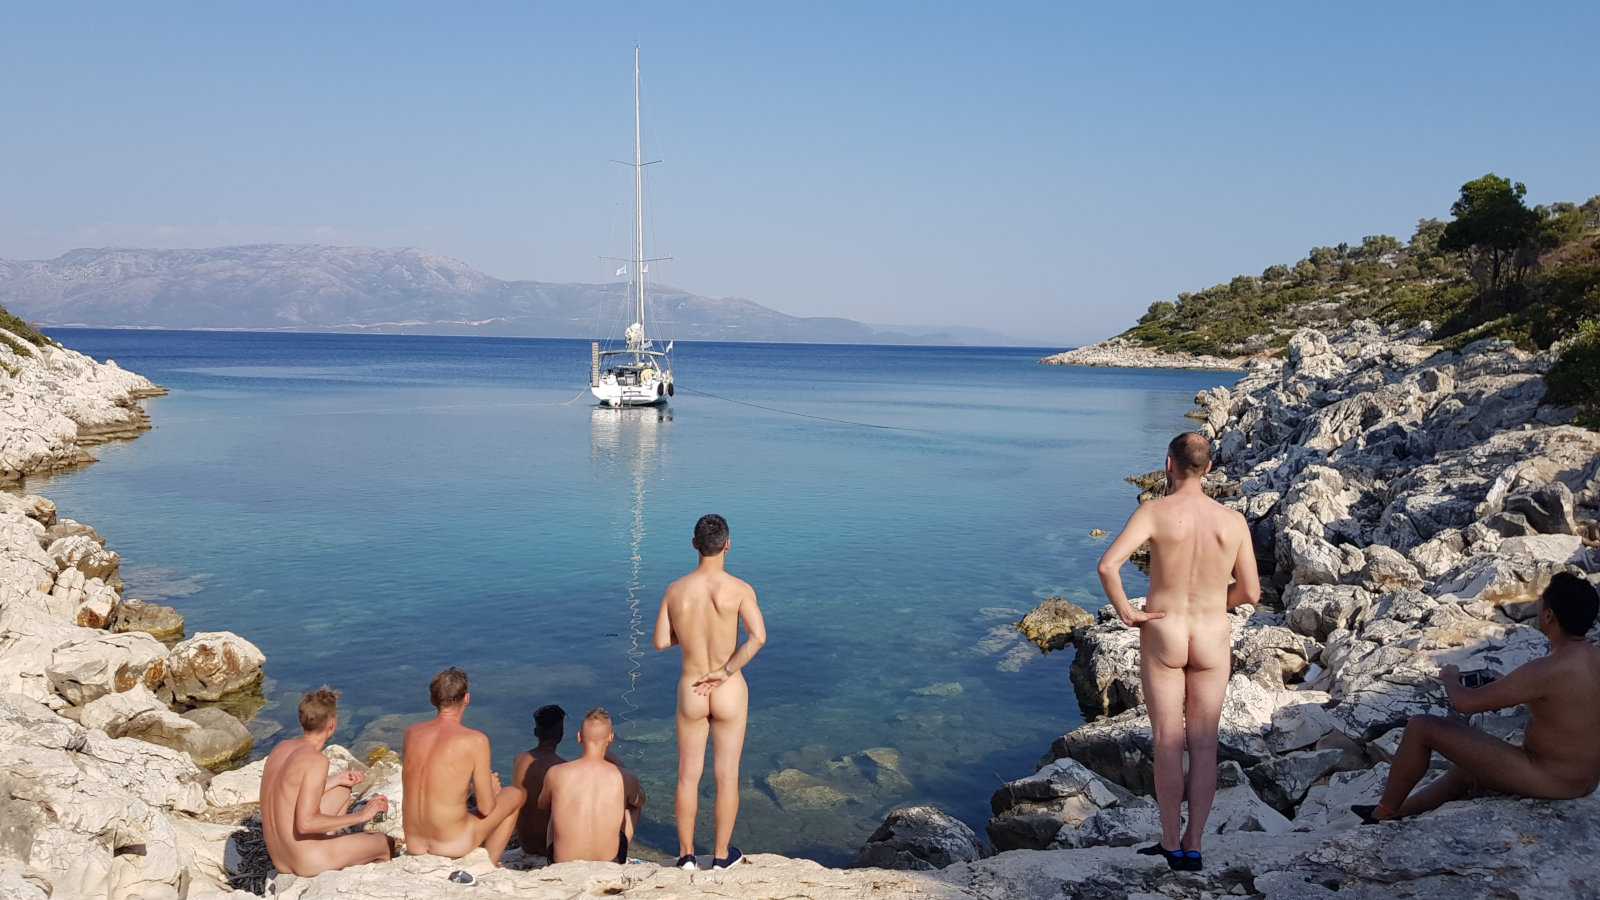 A group of nude men seen from behind as they look out over a yacht moored in a rocky bay.